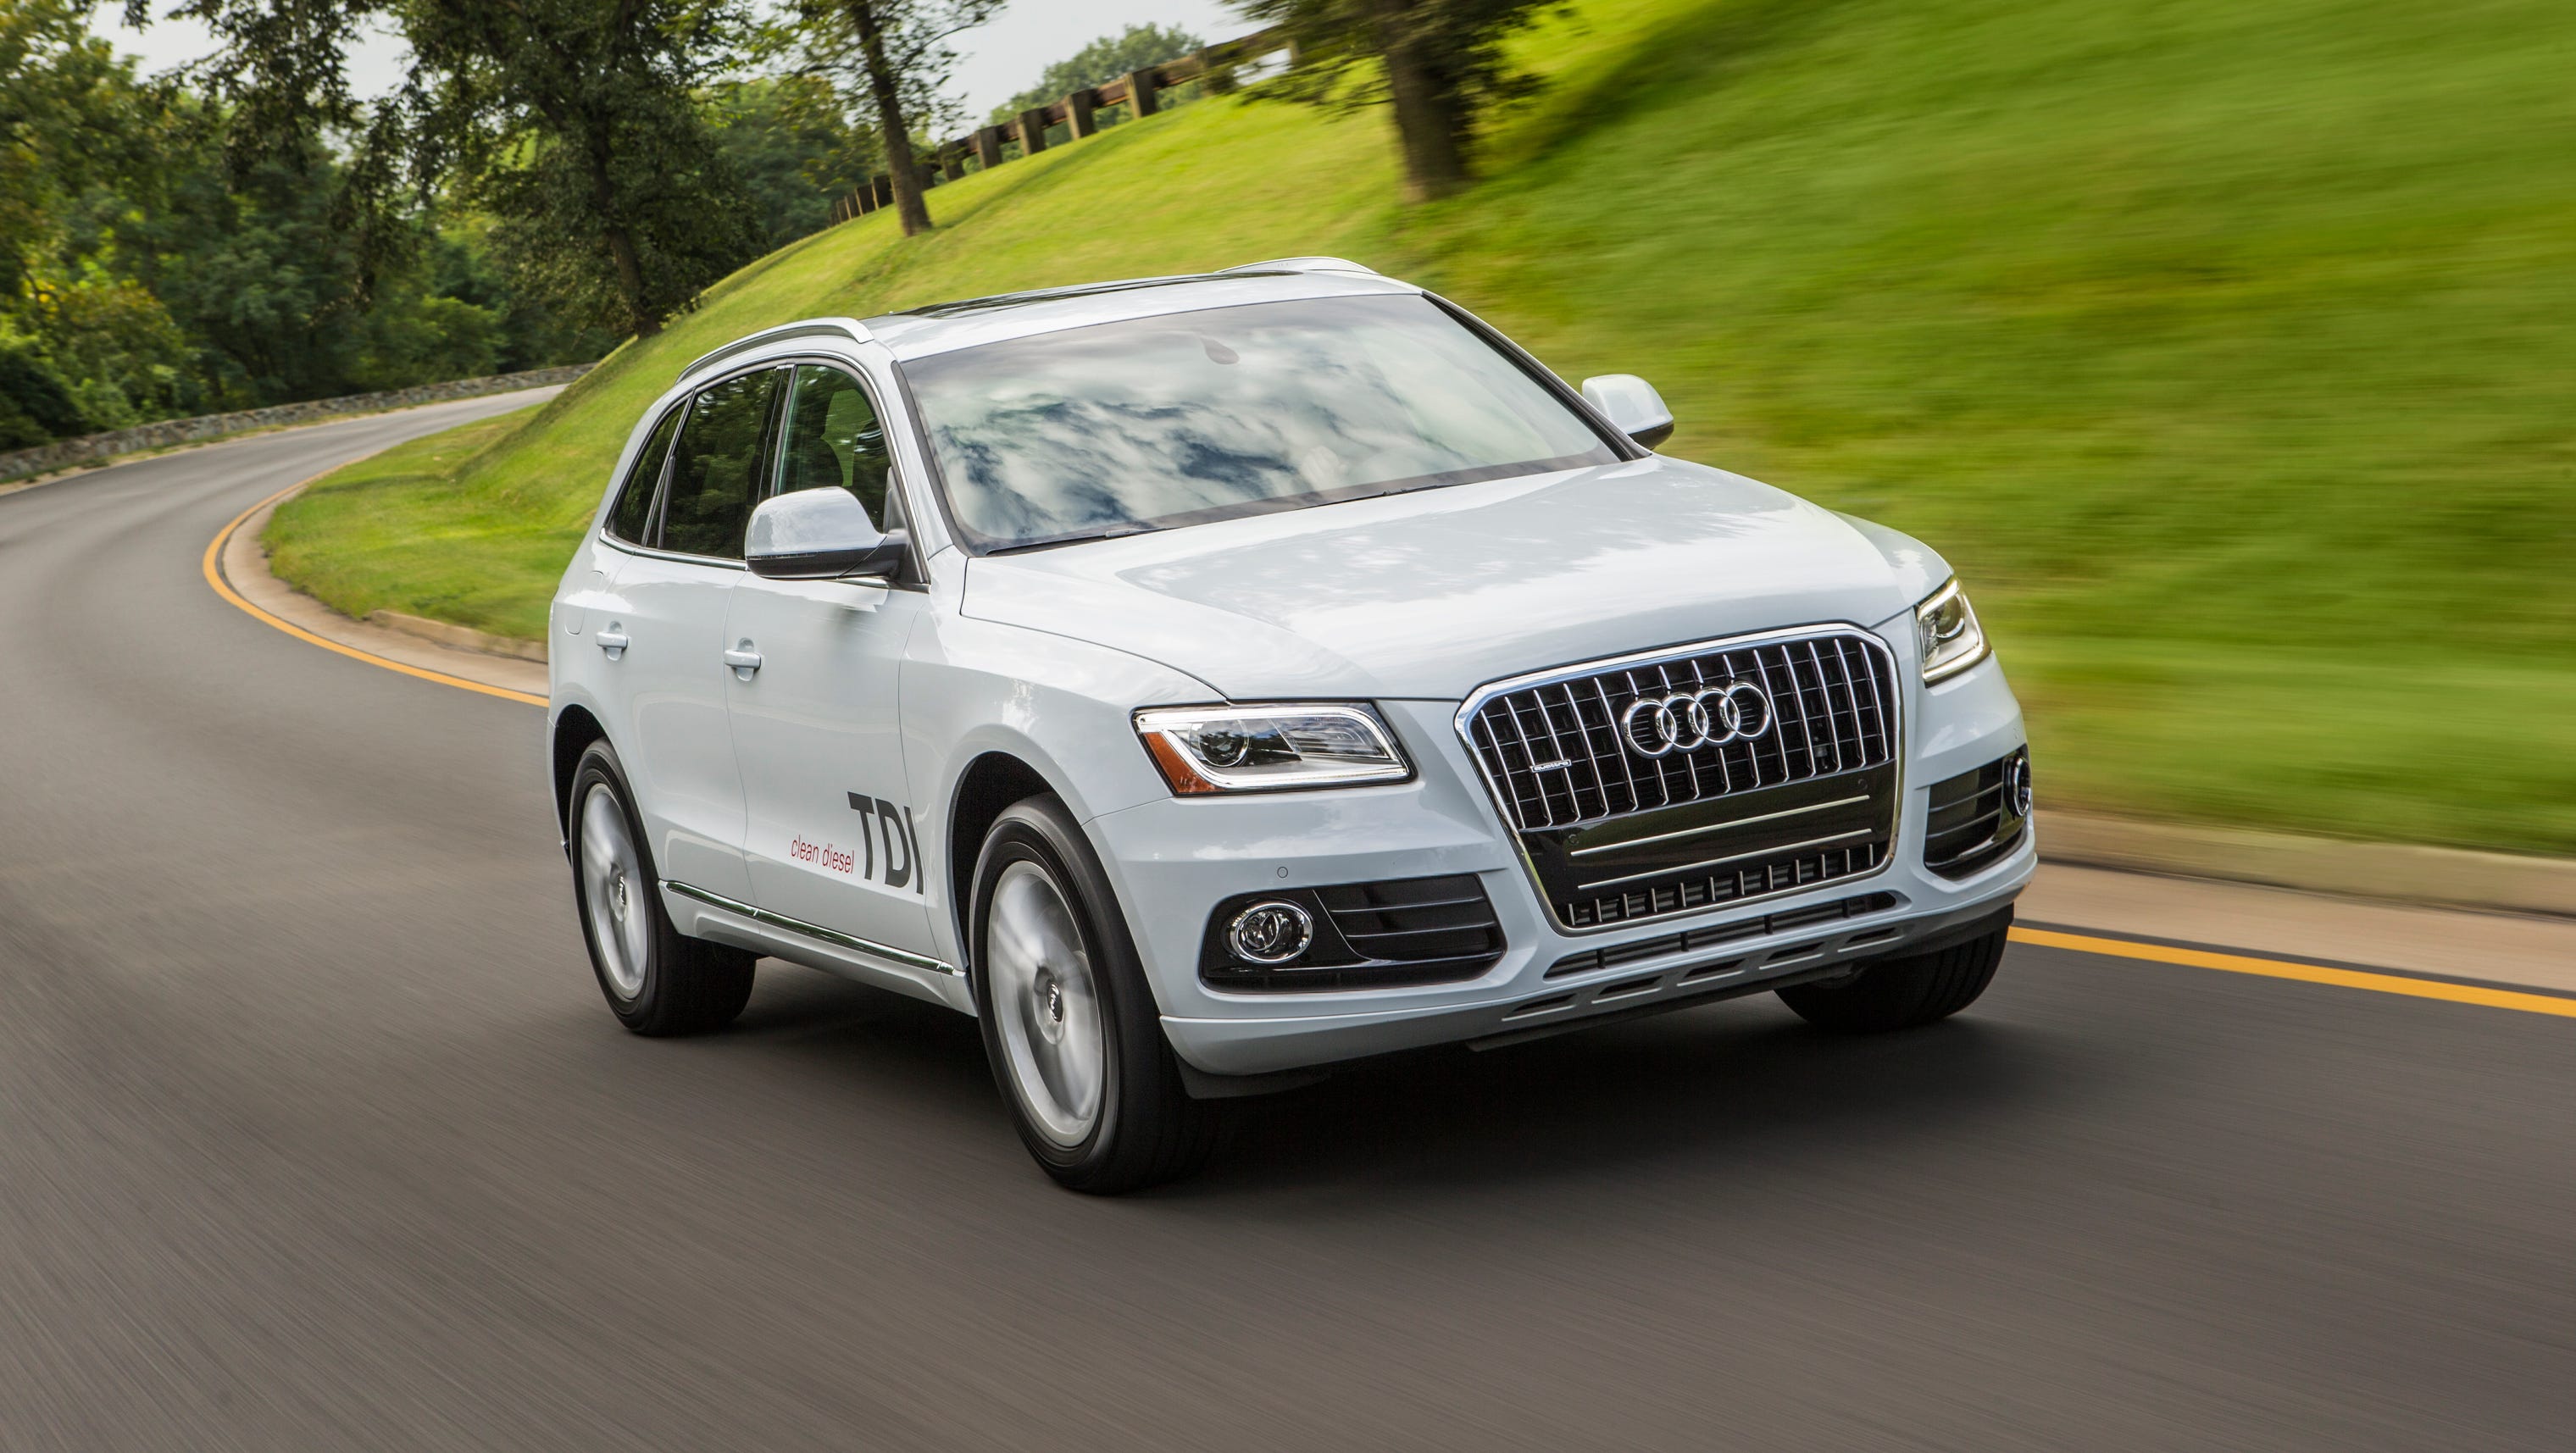 Auto review: 2014 Audi Q5 is fun for all seasons